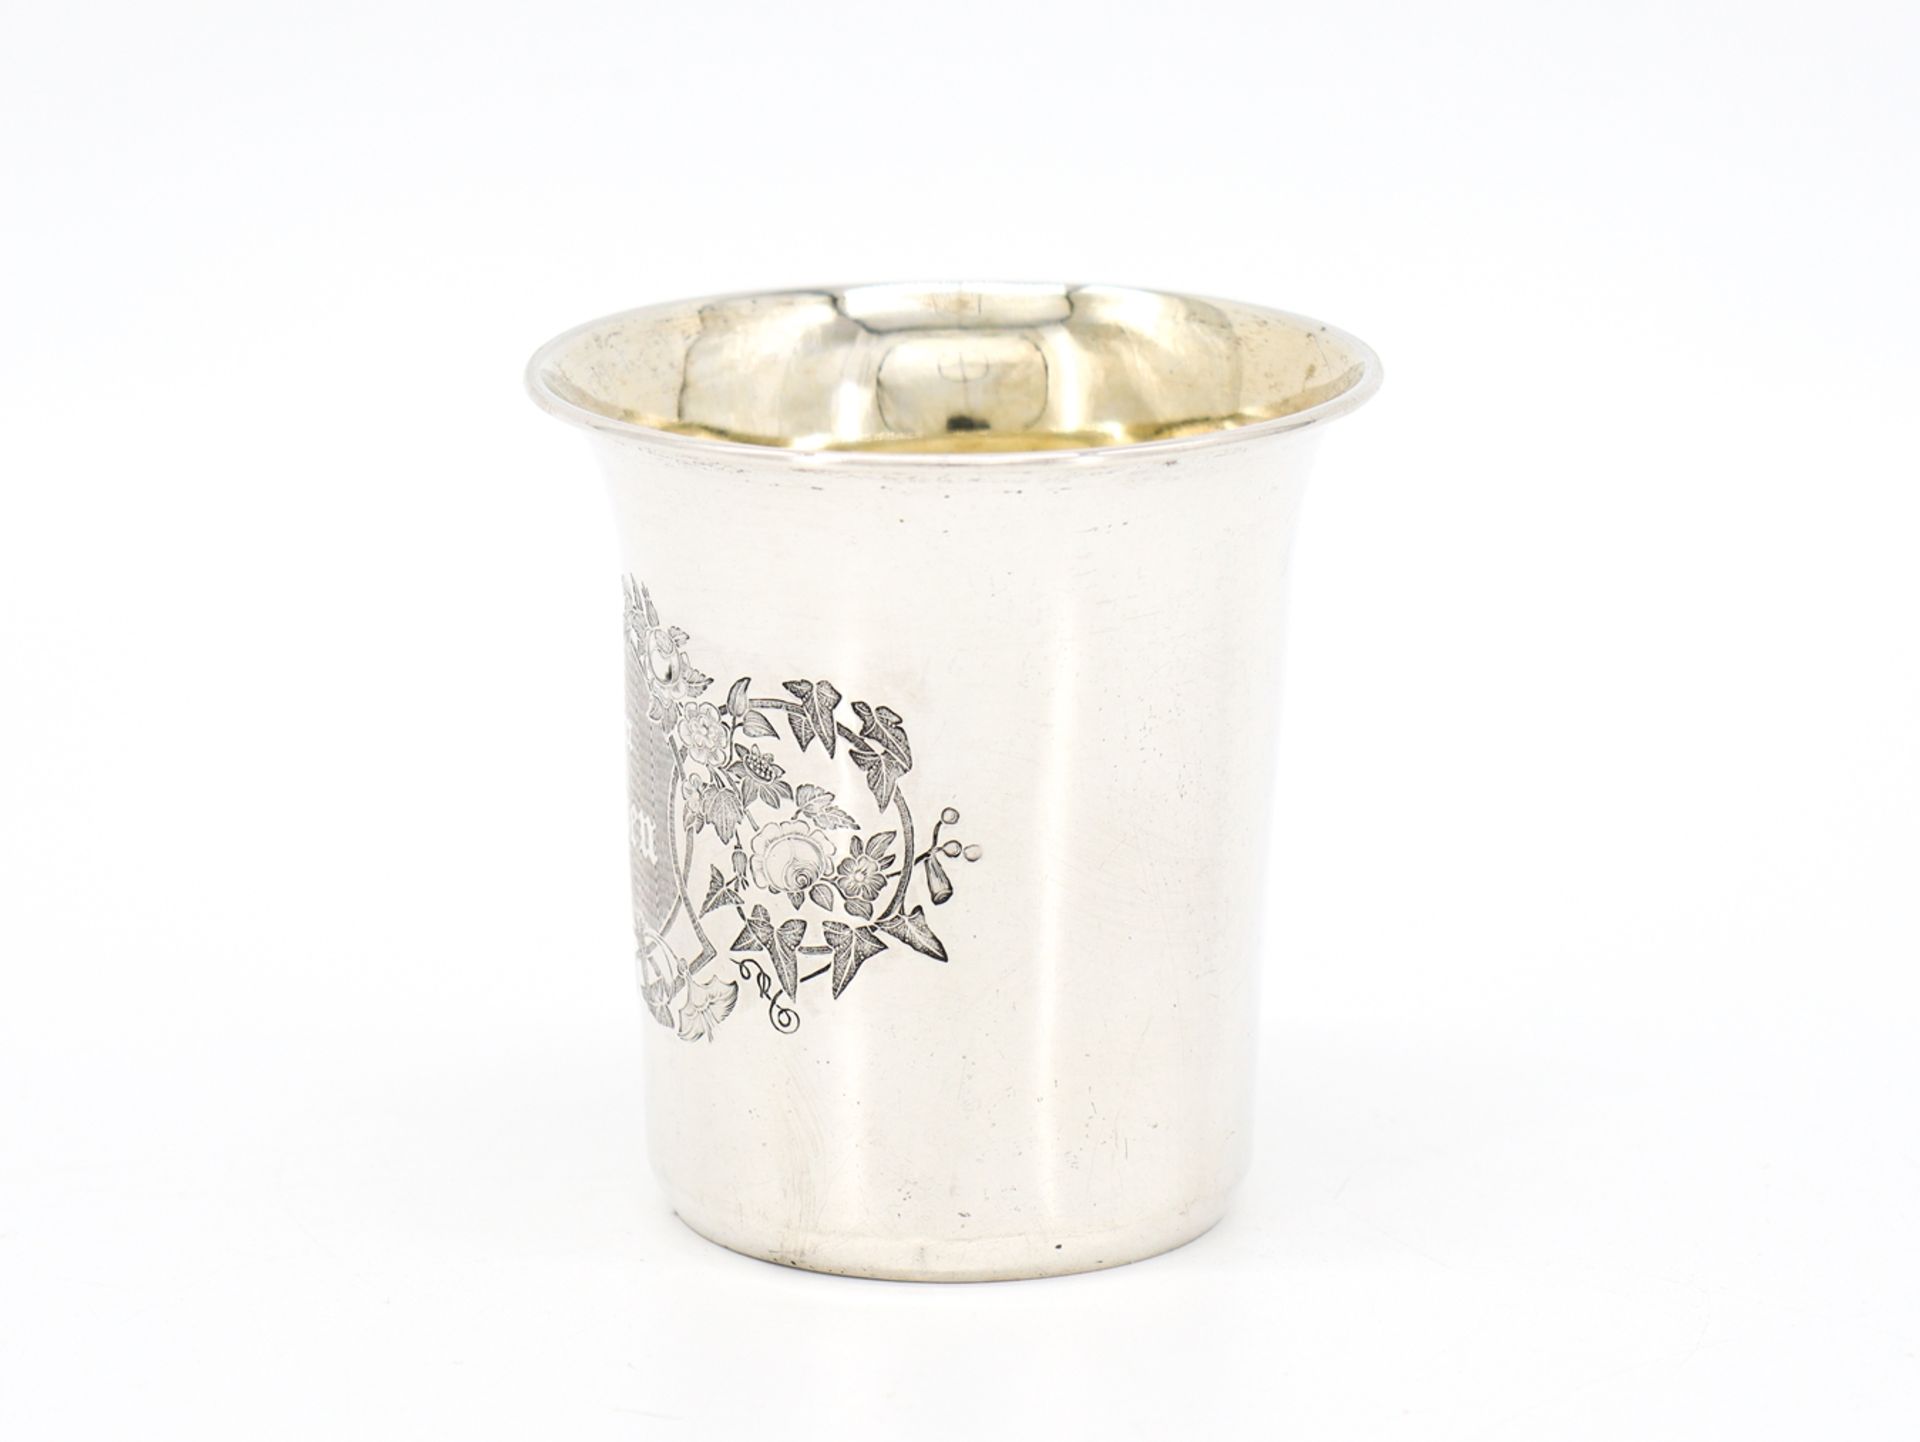 Baptismal cup silver gilded inside, mid 19th century. - Image 2 of 6